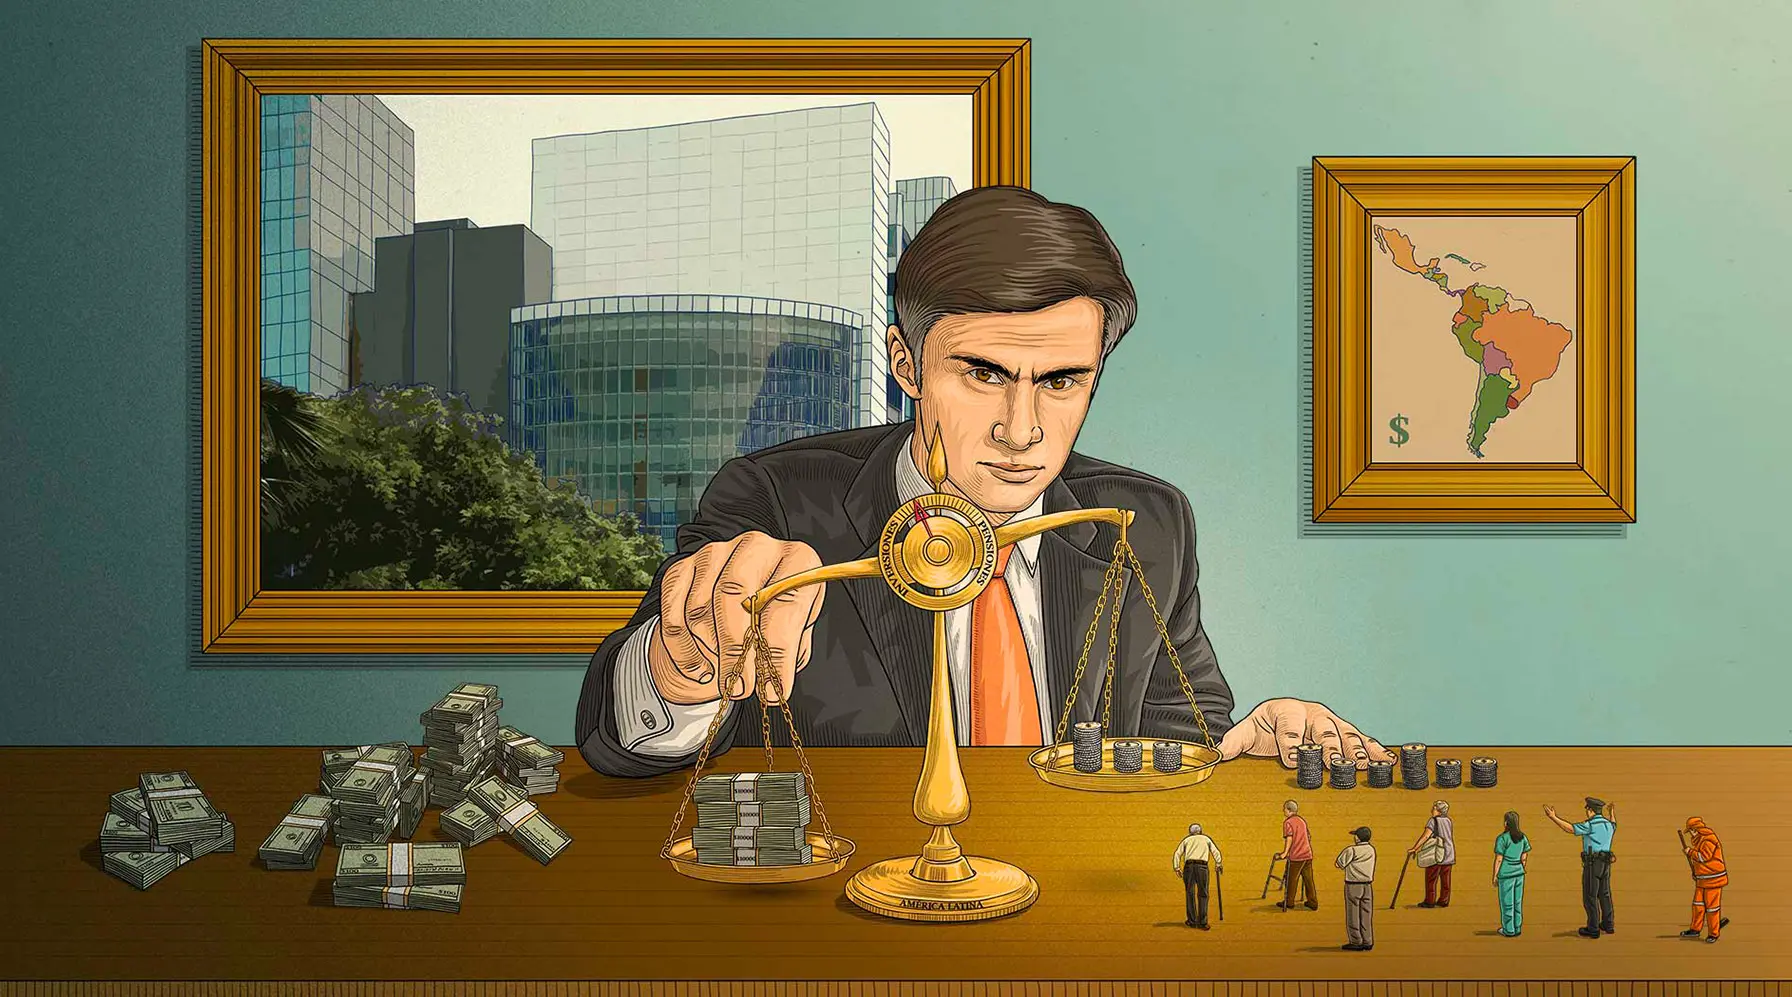 Drawing of man in a suit sitting at a table next to lots of money